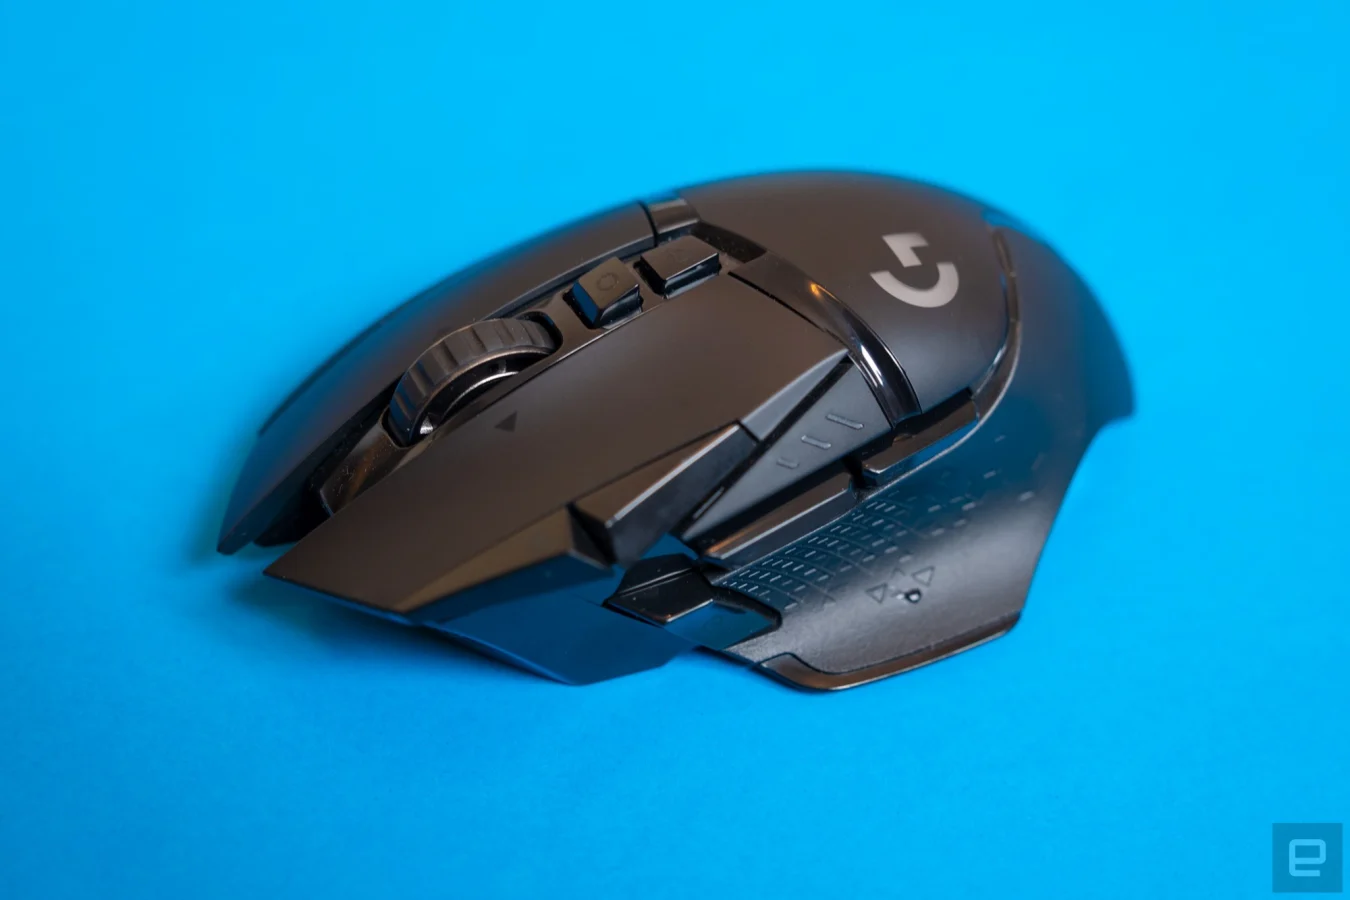 The Logitech G502 has a lot of configurable options, especially aimed at gamers.